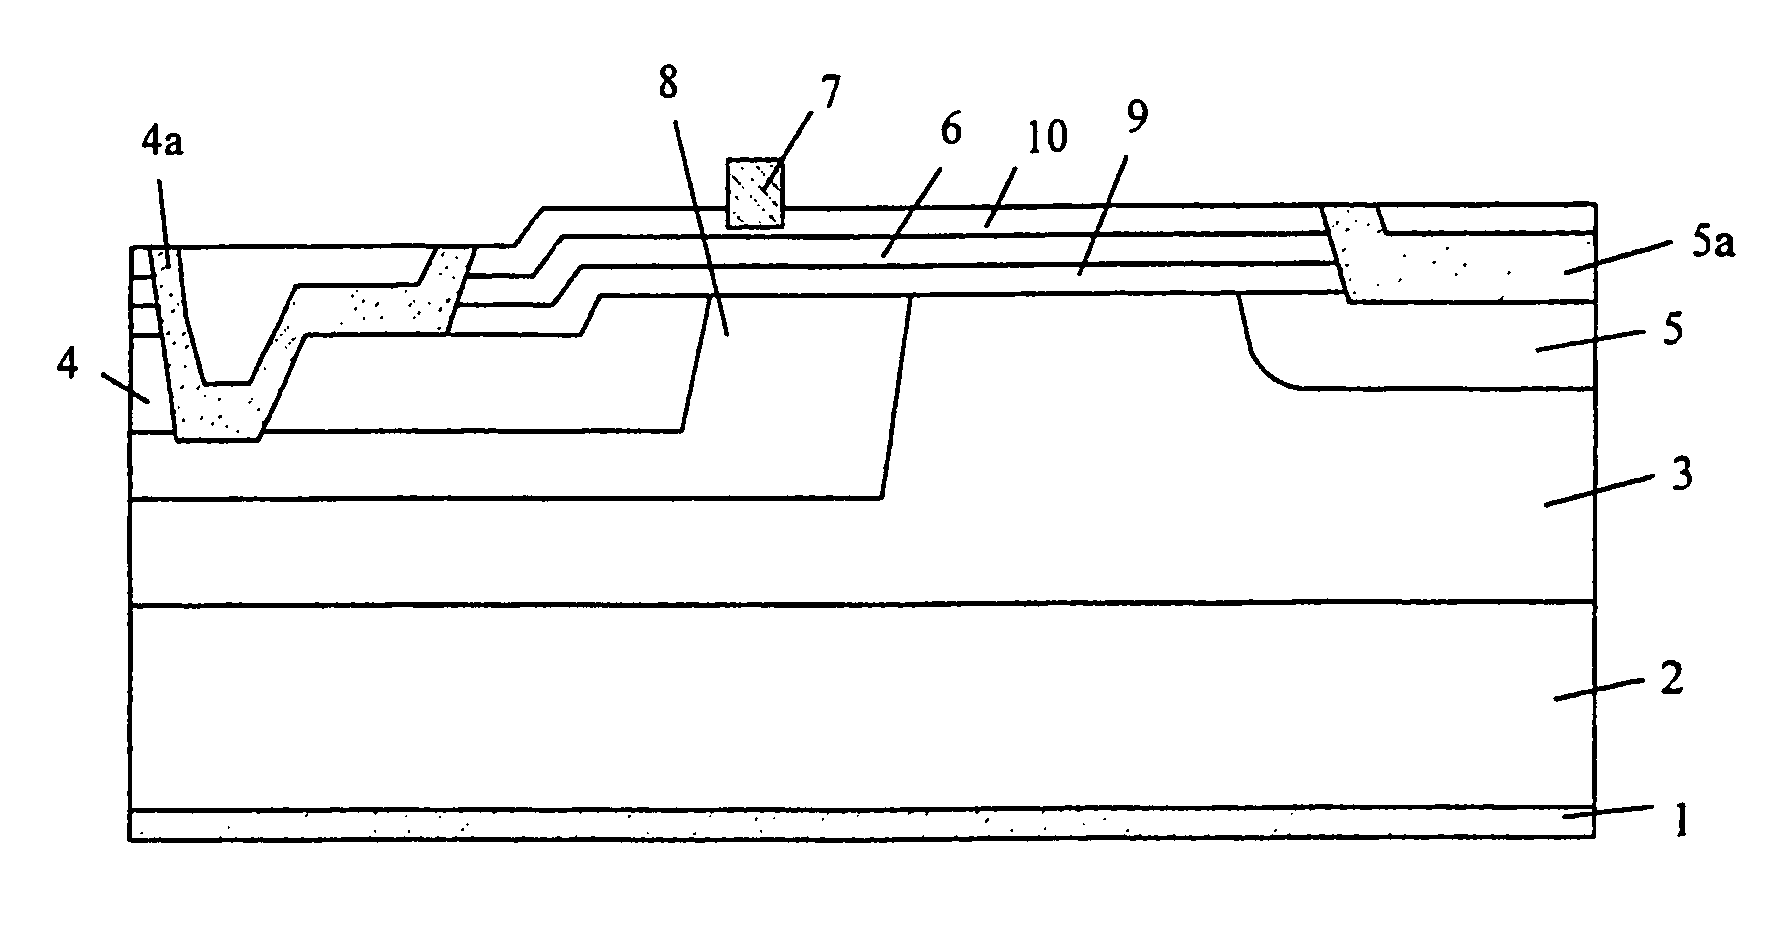 Lateral field effect transistor and its fabrication comprising a spacer layer above and below the channel layer